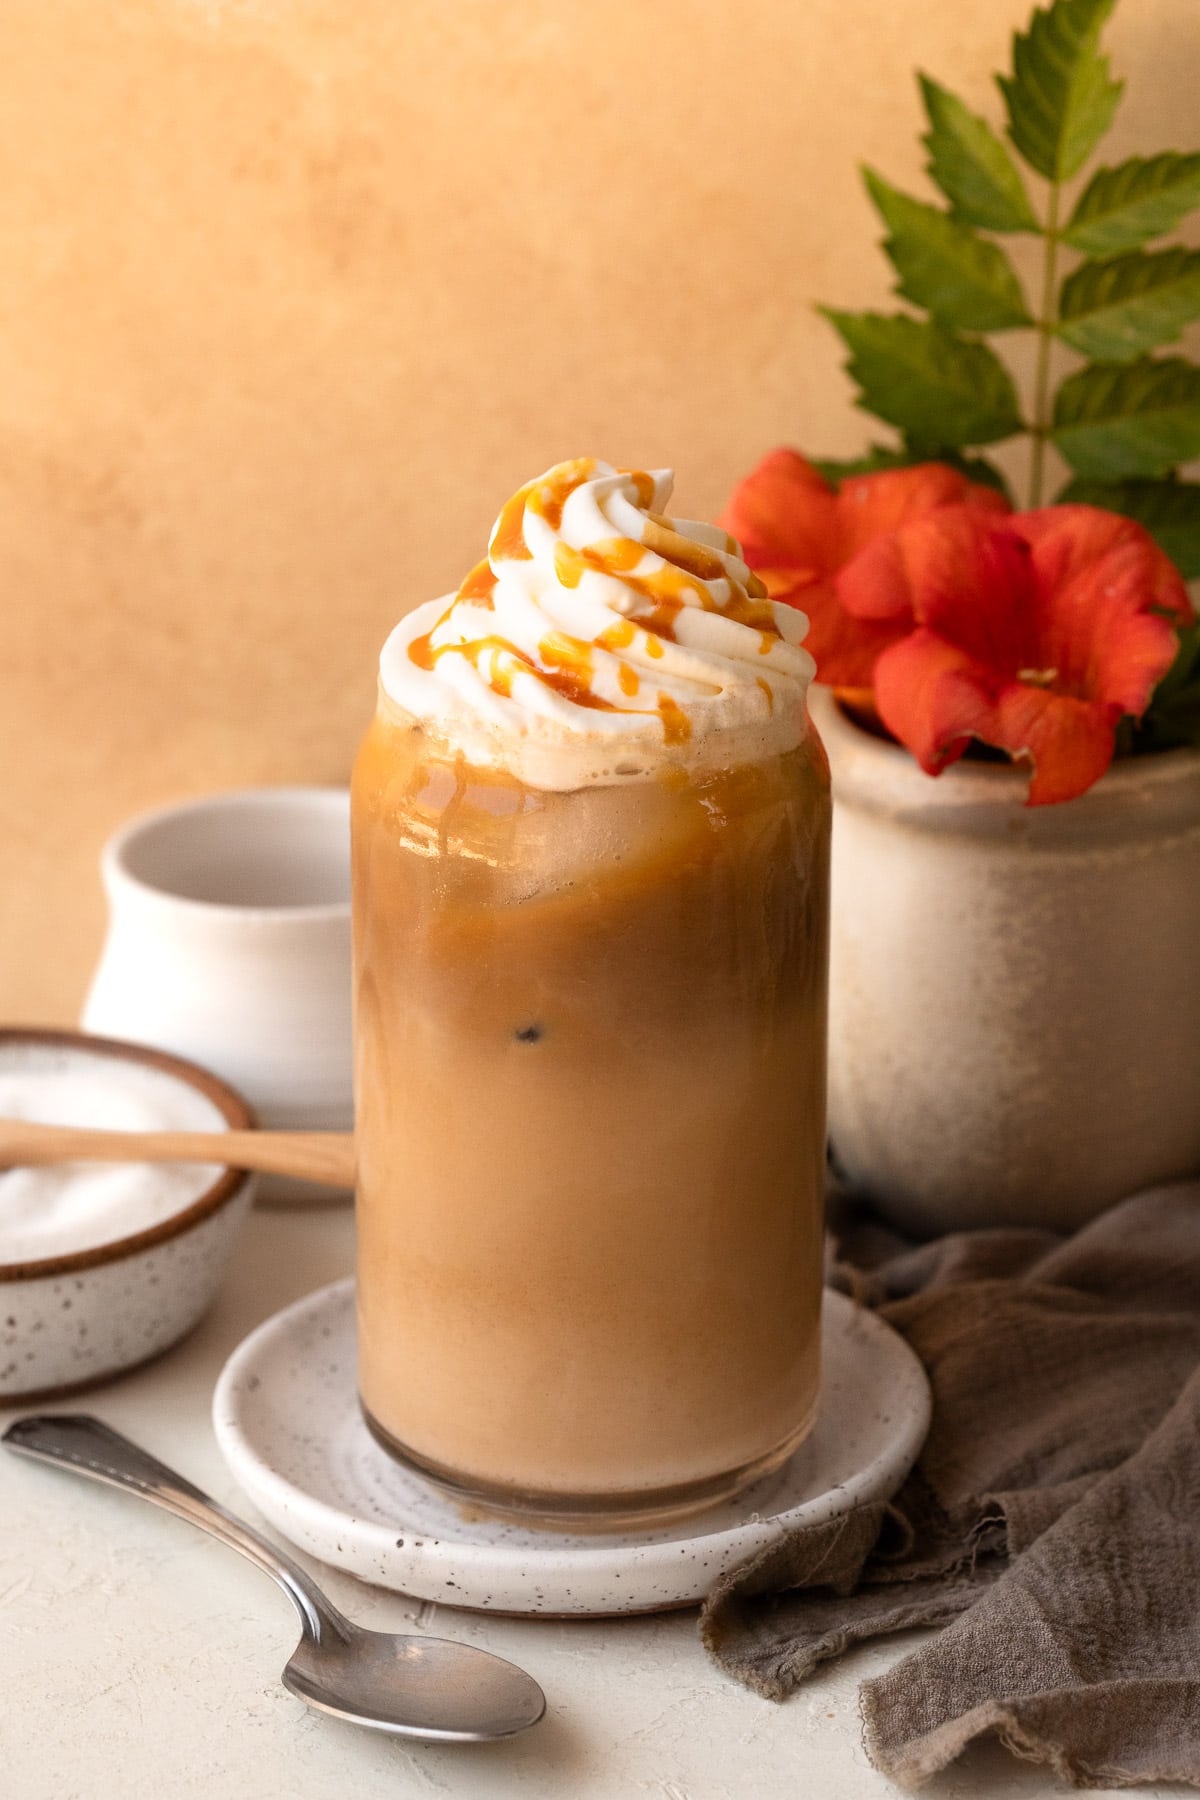 Iced latte topped with whipped cream and a caramel drizzle, with a vase of flowers in the background.